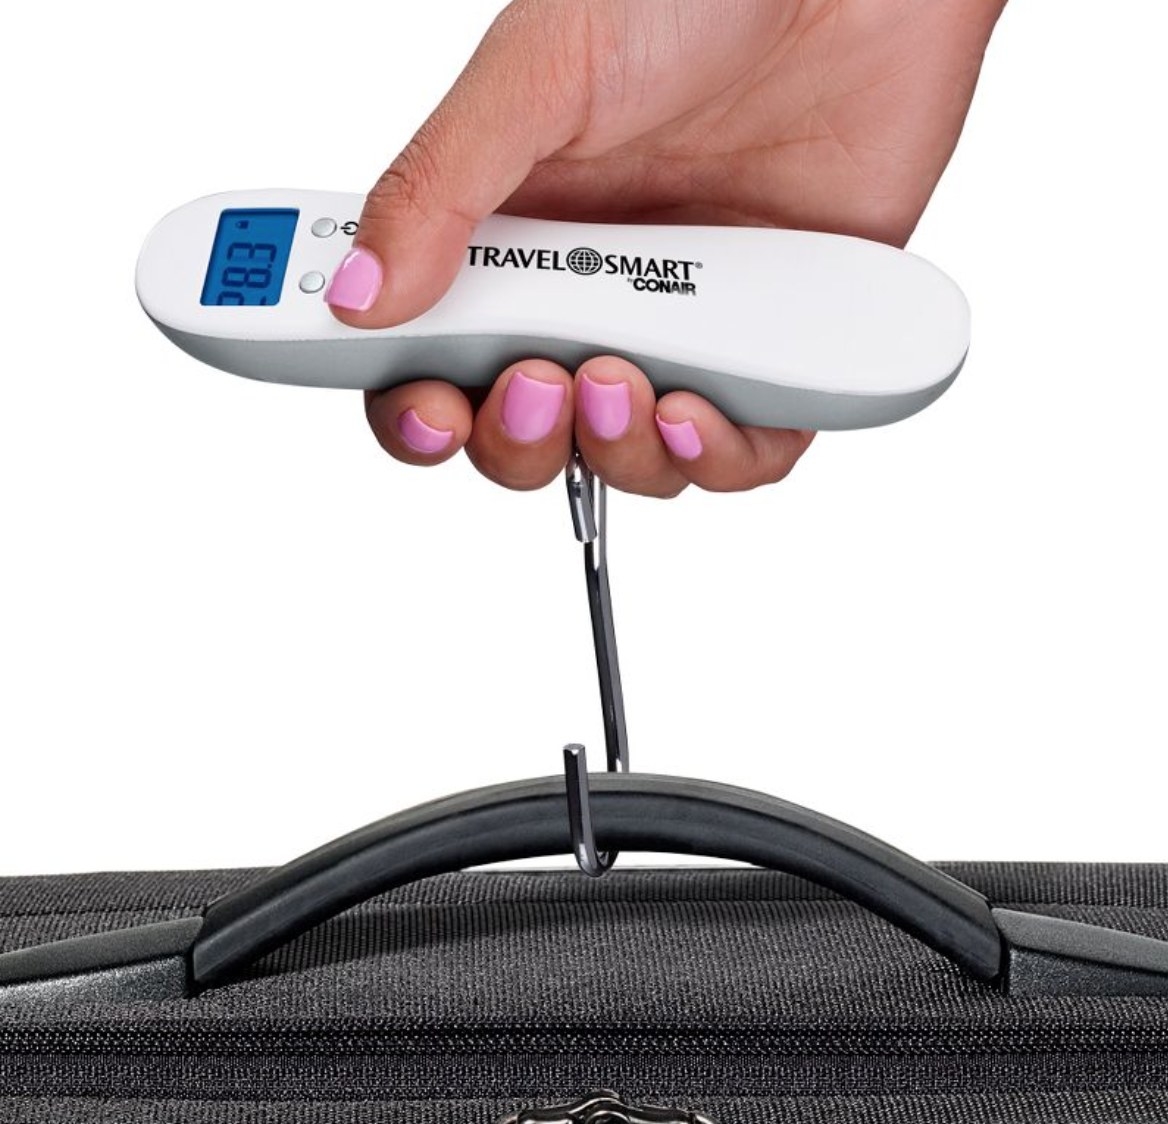 the luggage scale